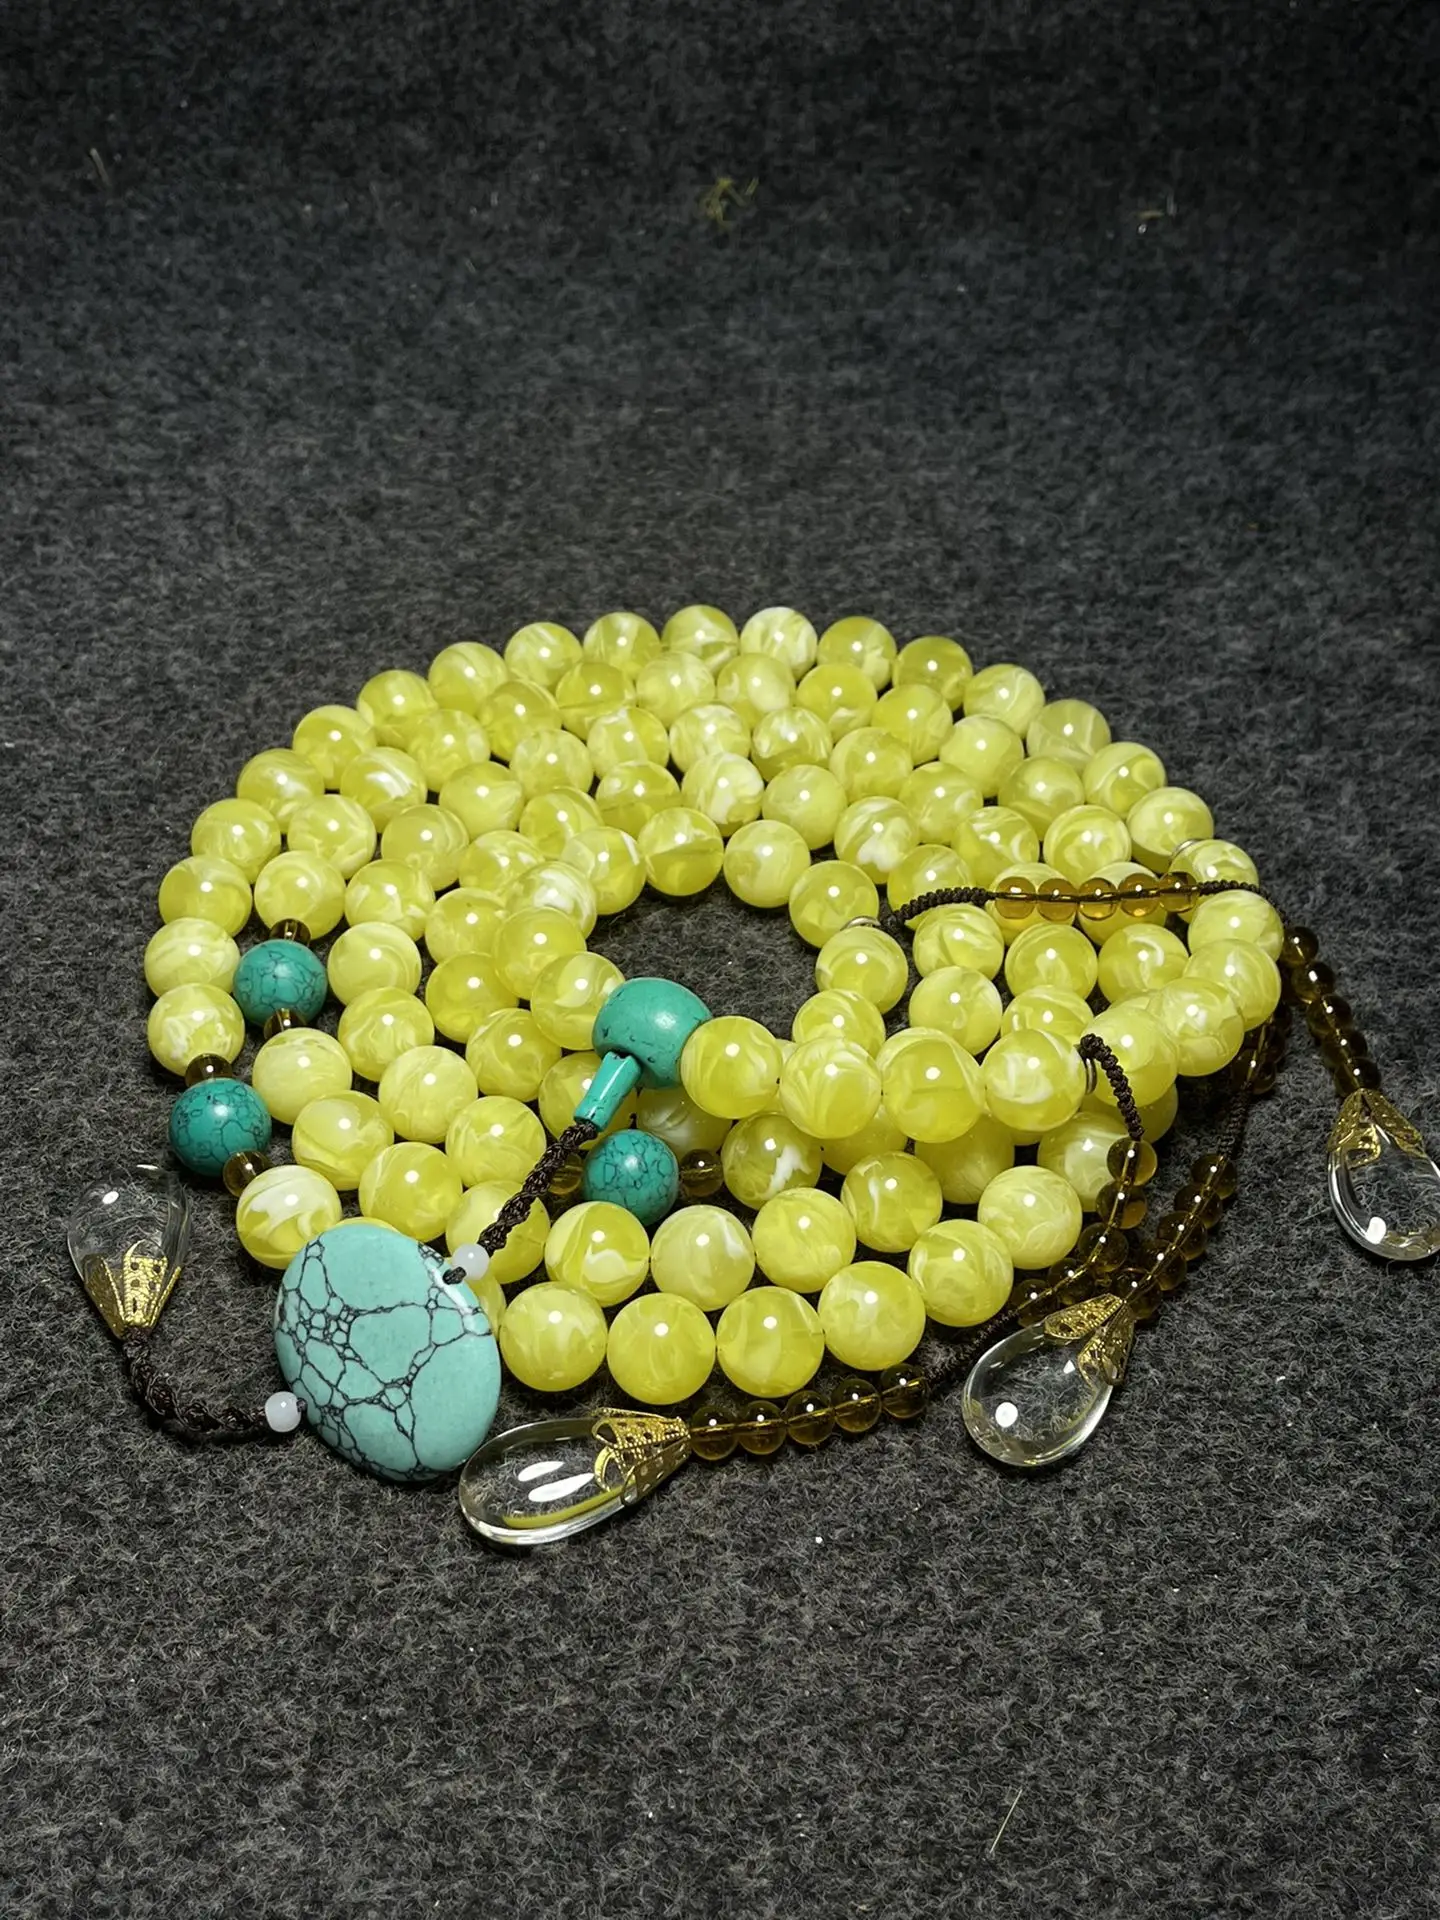 

Home Crafts Beeswax Jewelry Exquisite Craftsmanship each Bead Carefully Selected and Worth Collecting